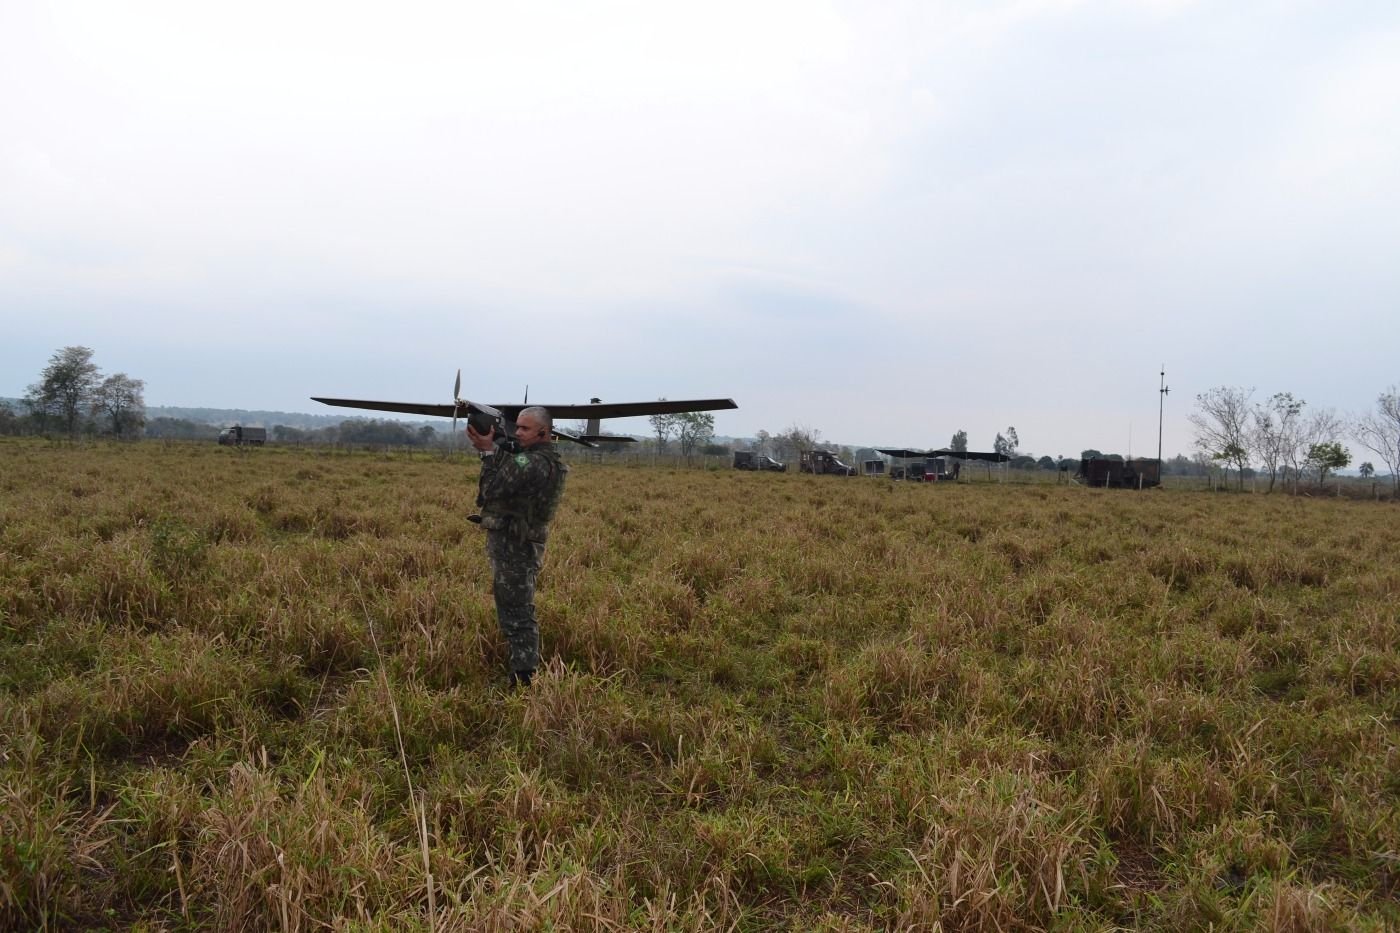 Brazilian Army Tests Remotely Piloted Aircraft System for Use along Its National Borders